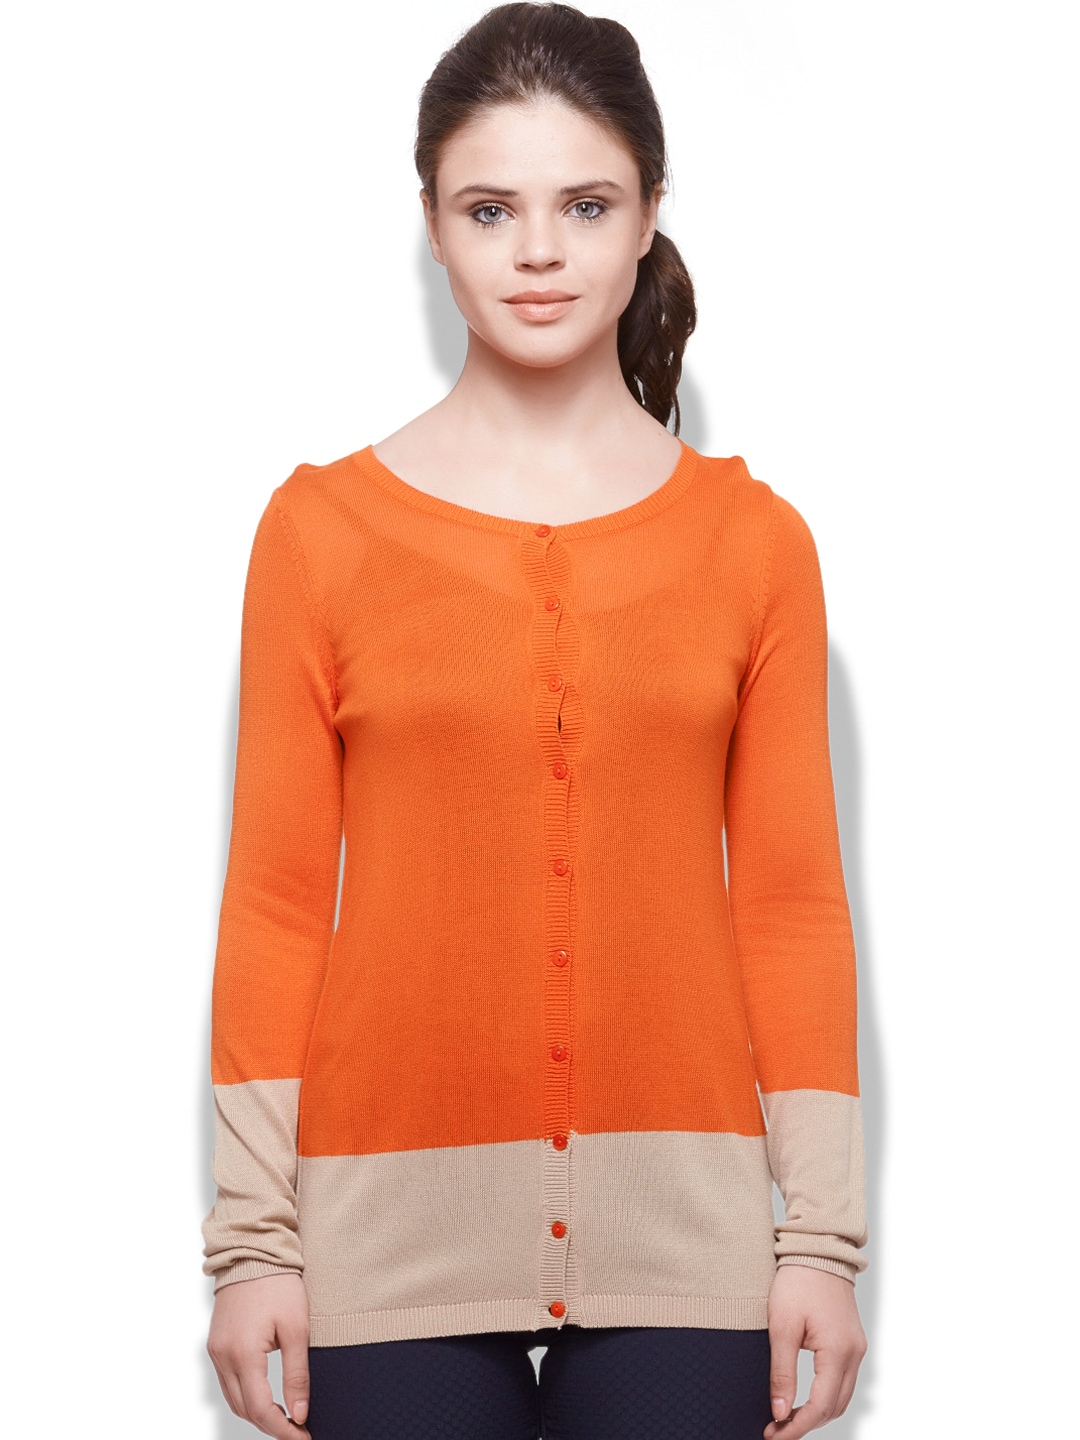  Clothing Women Clothing Sweaters United Colors of Benetton Sweaters